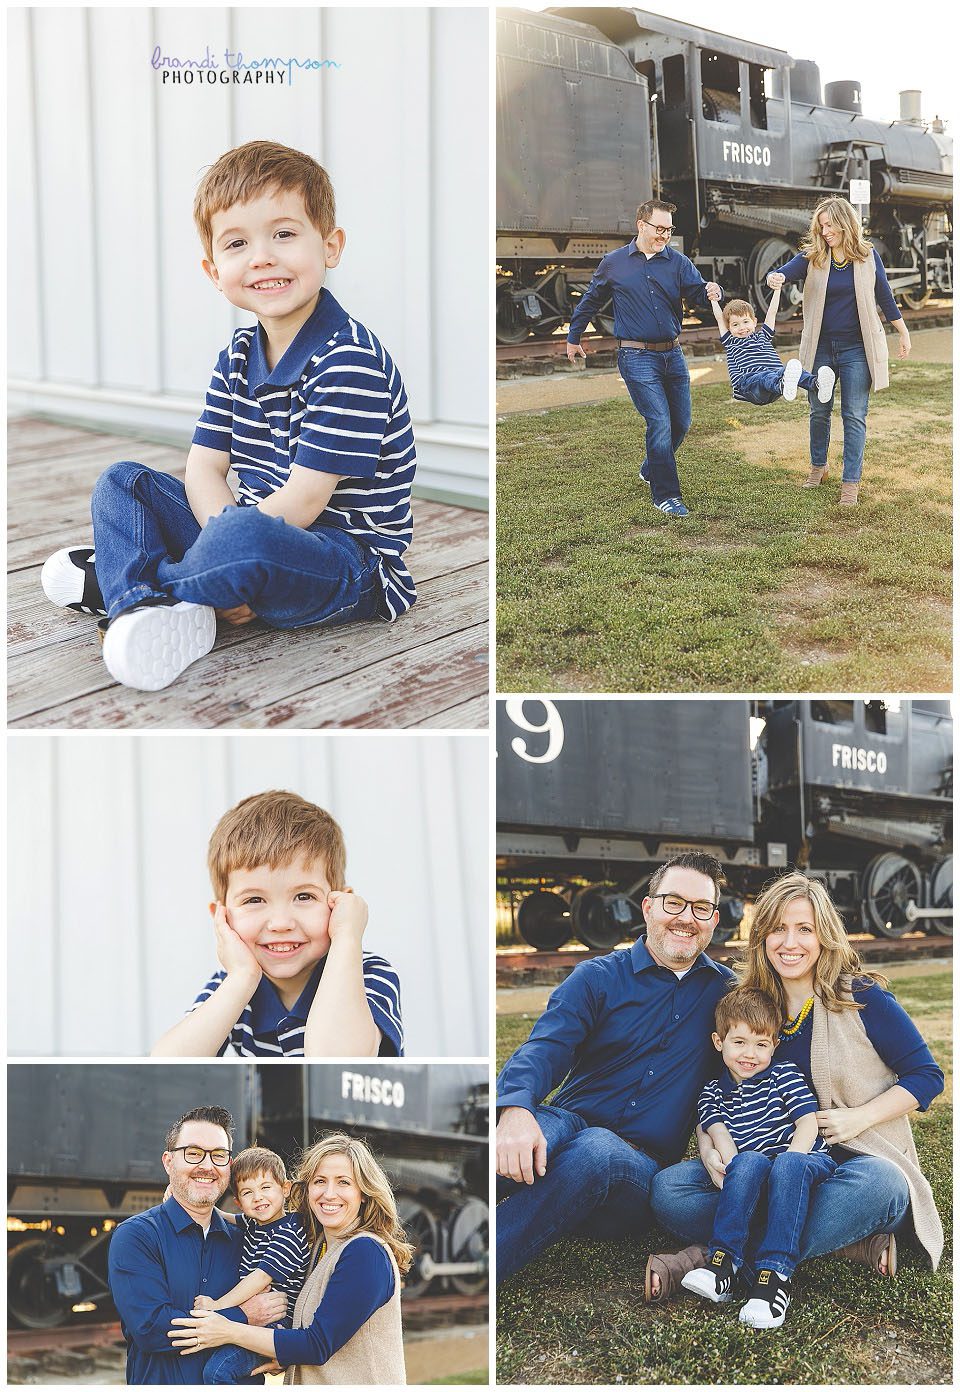 outdoor family session with train and log cabin in frisco, tx mom, dad and young son